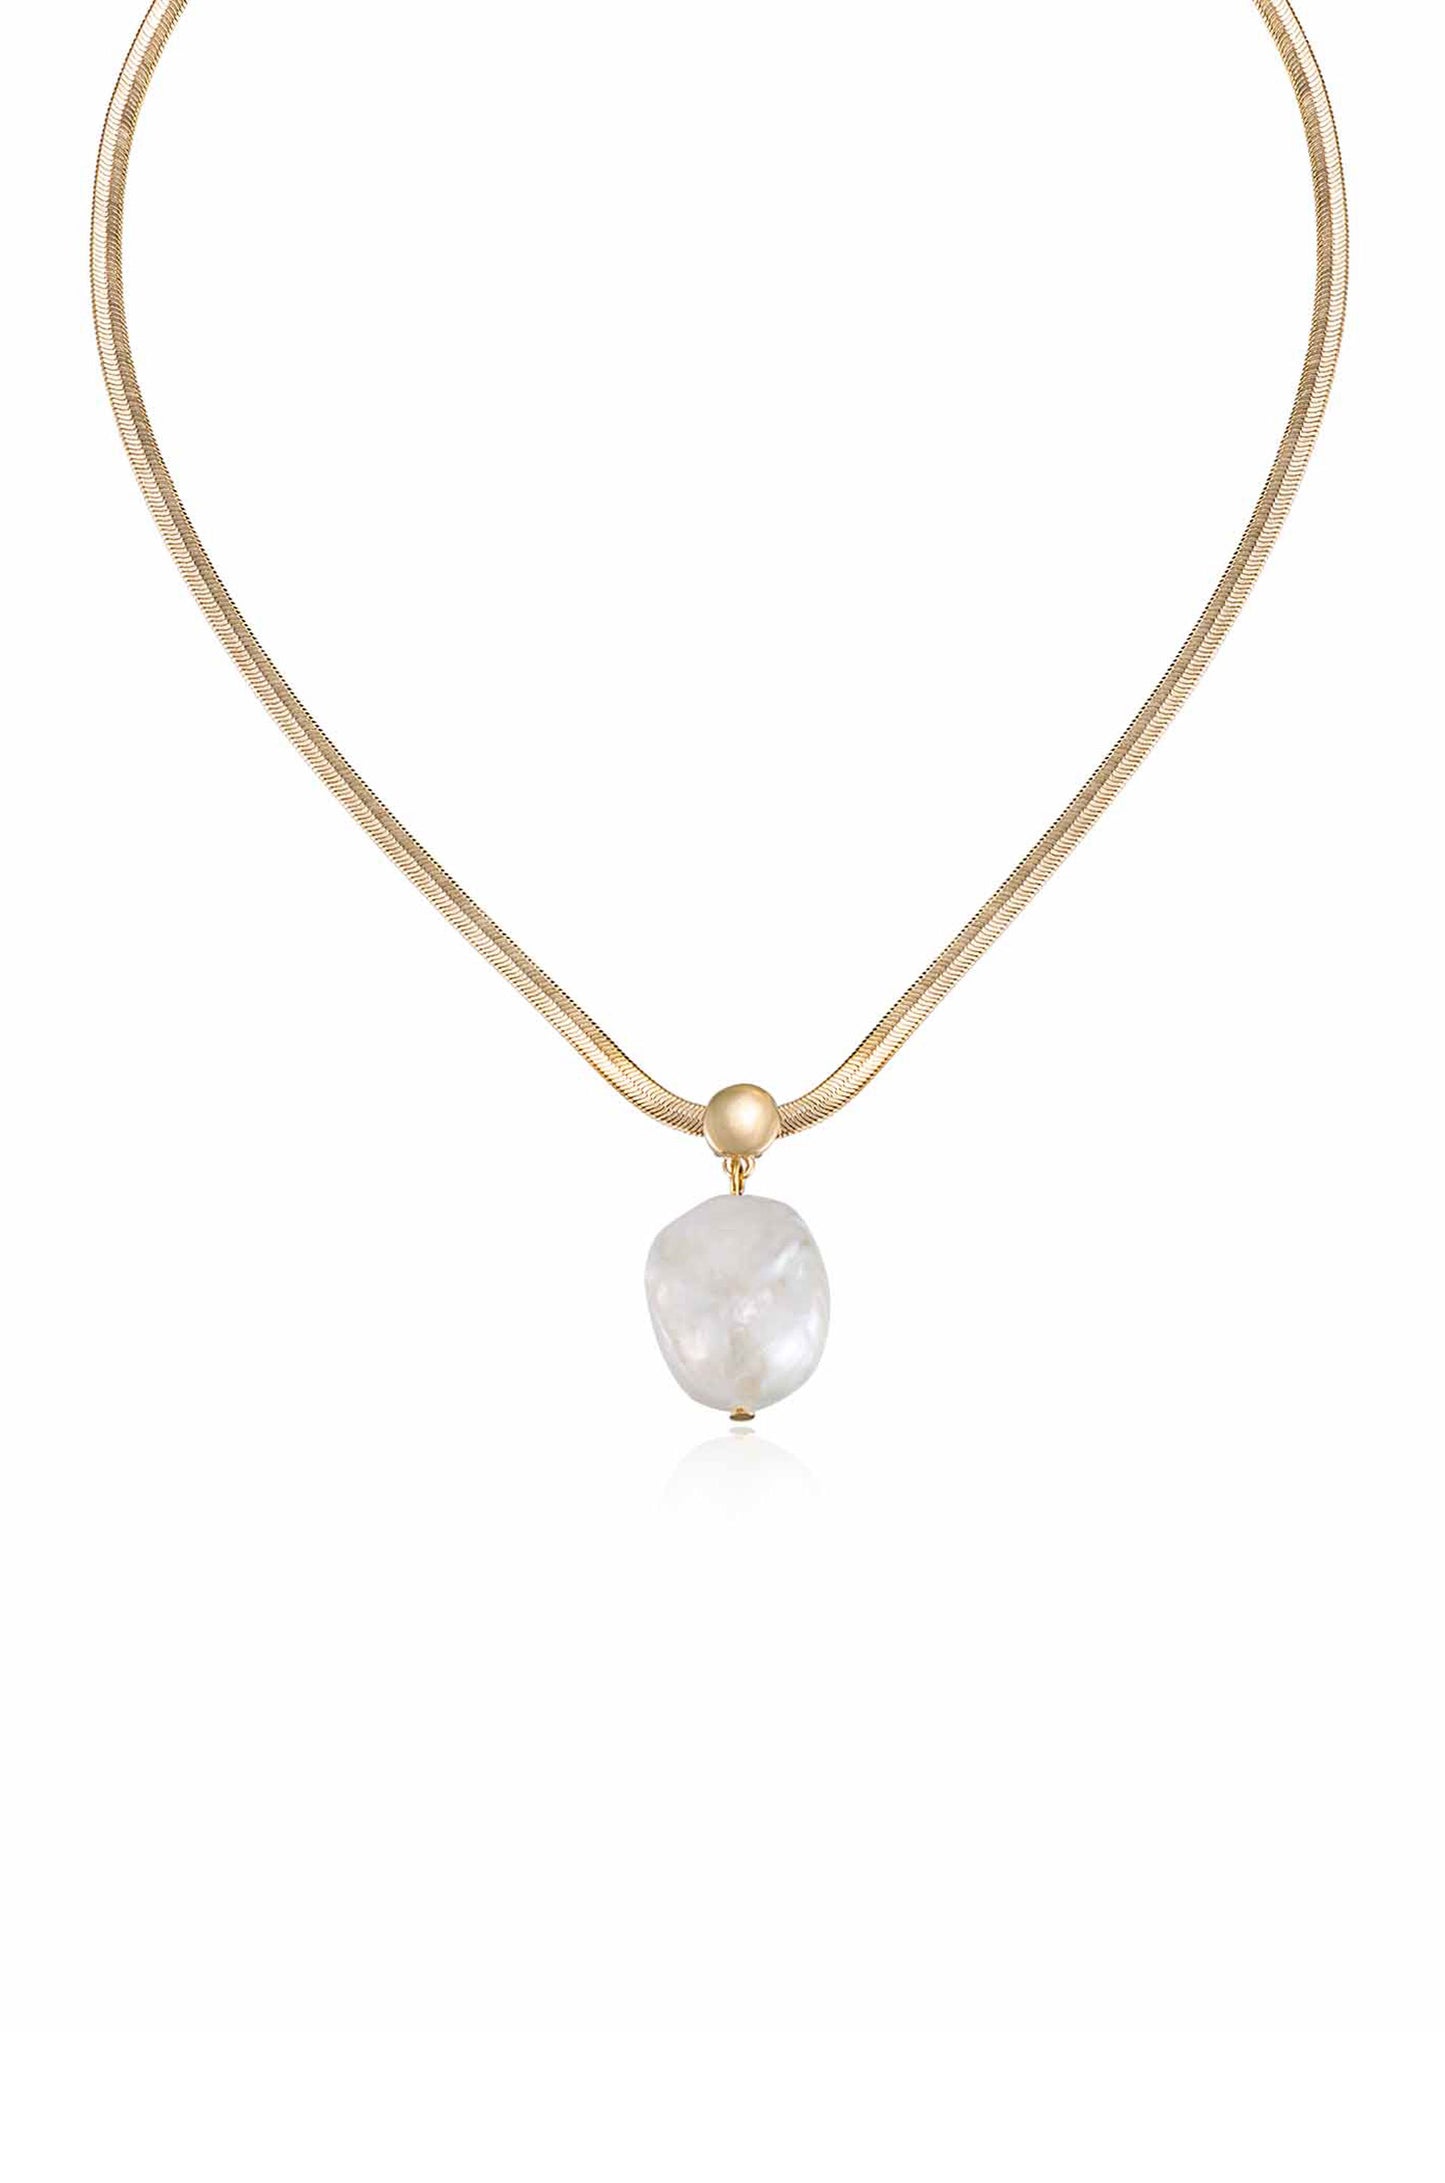 Baroque Pearl Pendant 18k Gold Plated Snake Chain Necklace on white close up